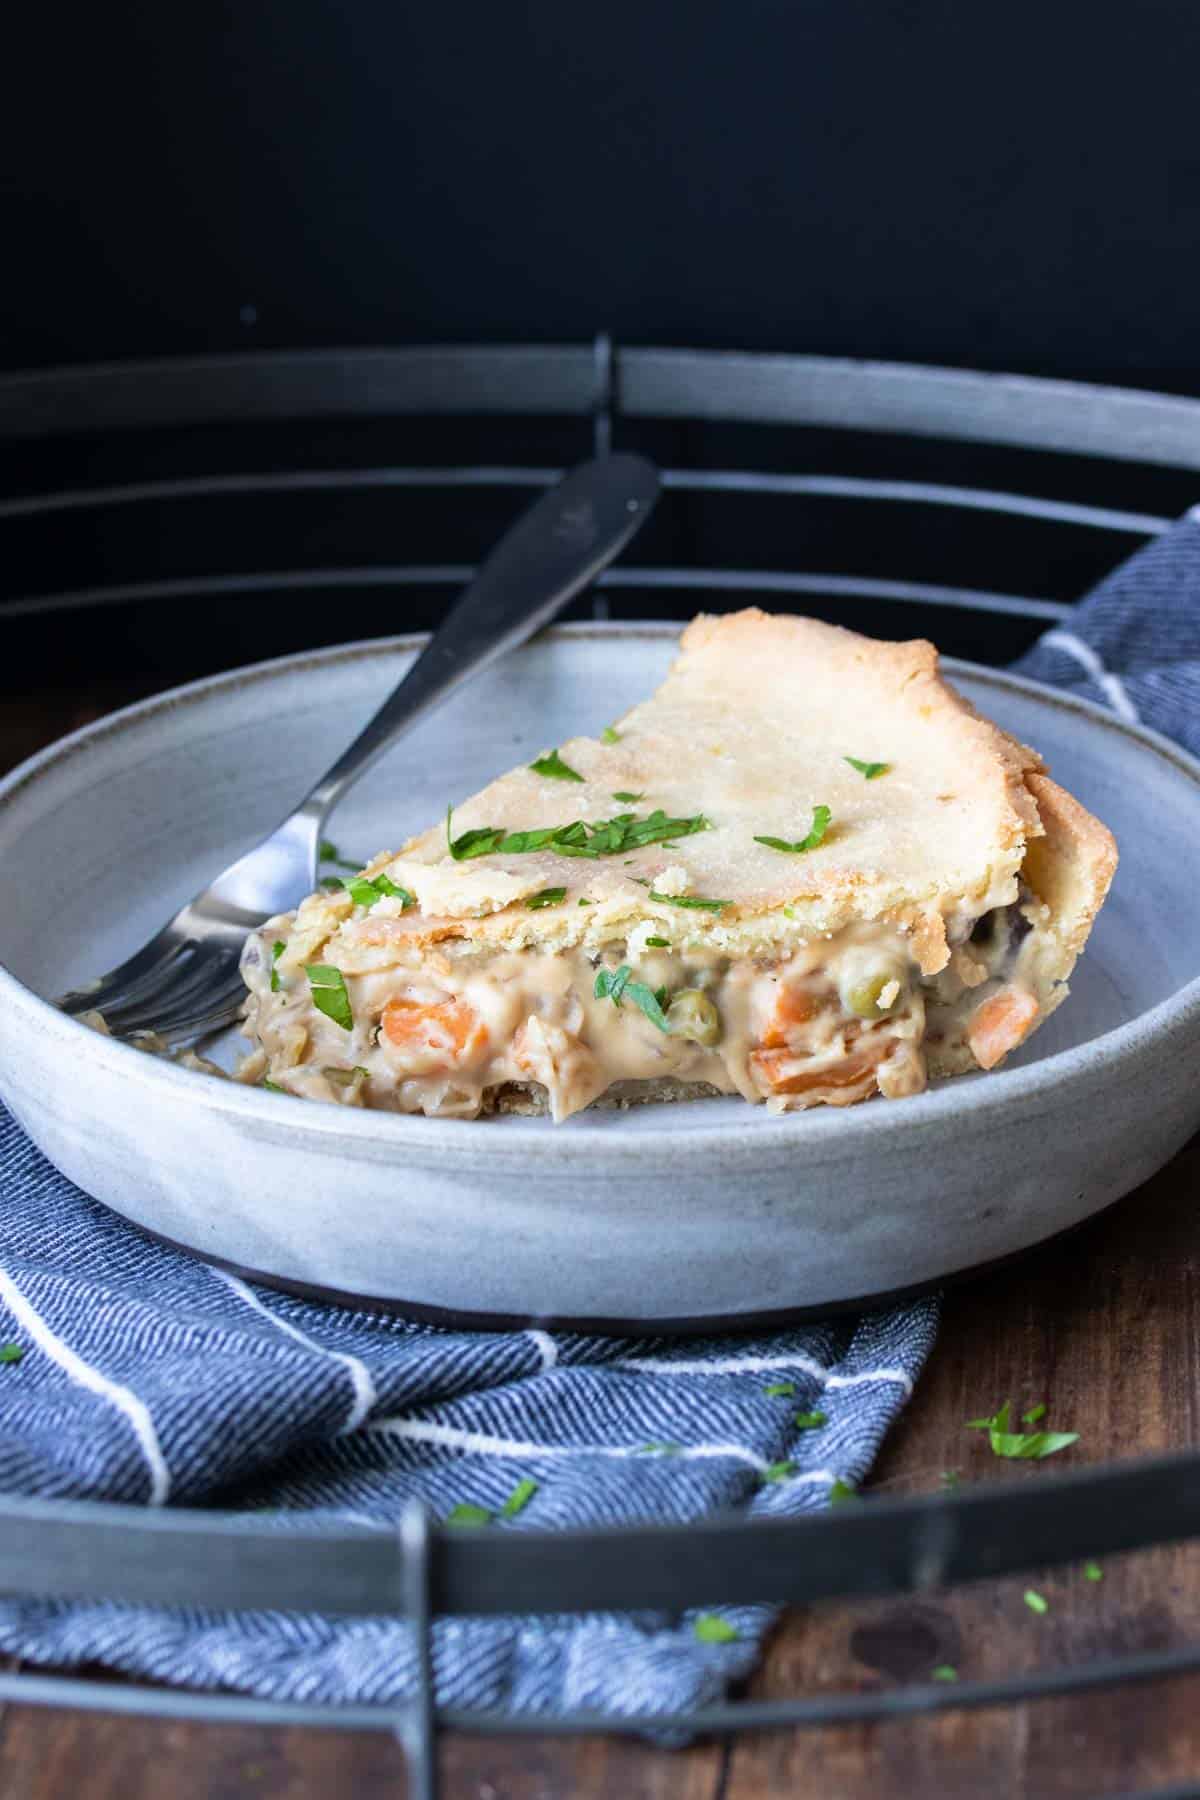 A piece of veggie pot pie on a plate with a fork next to it